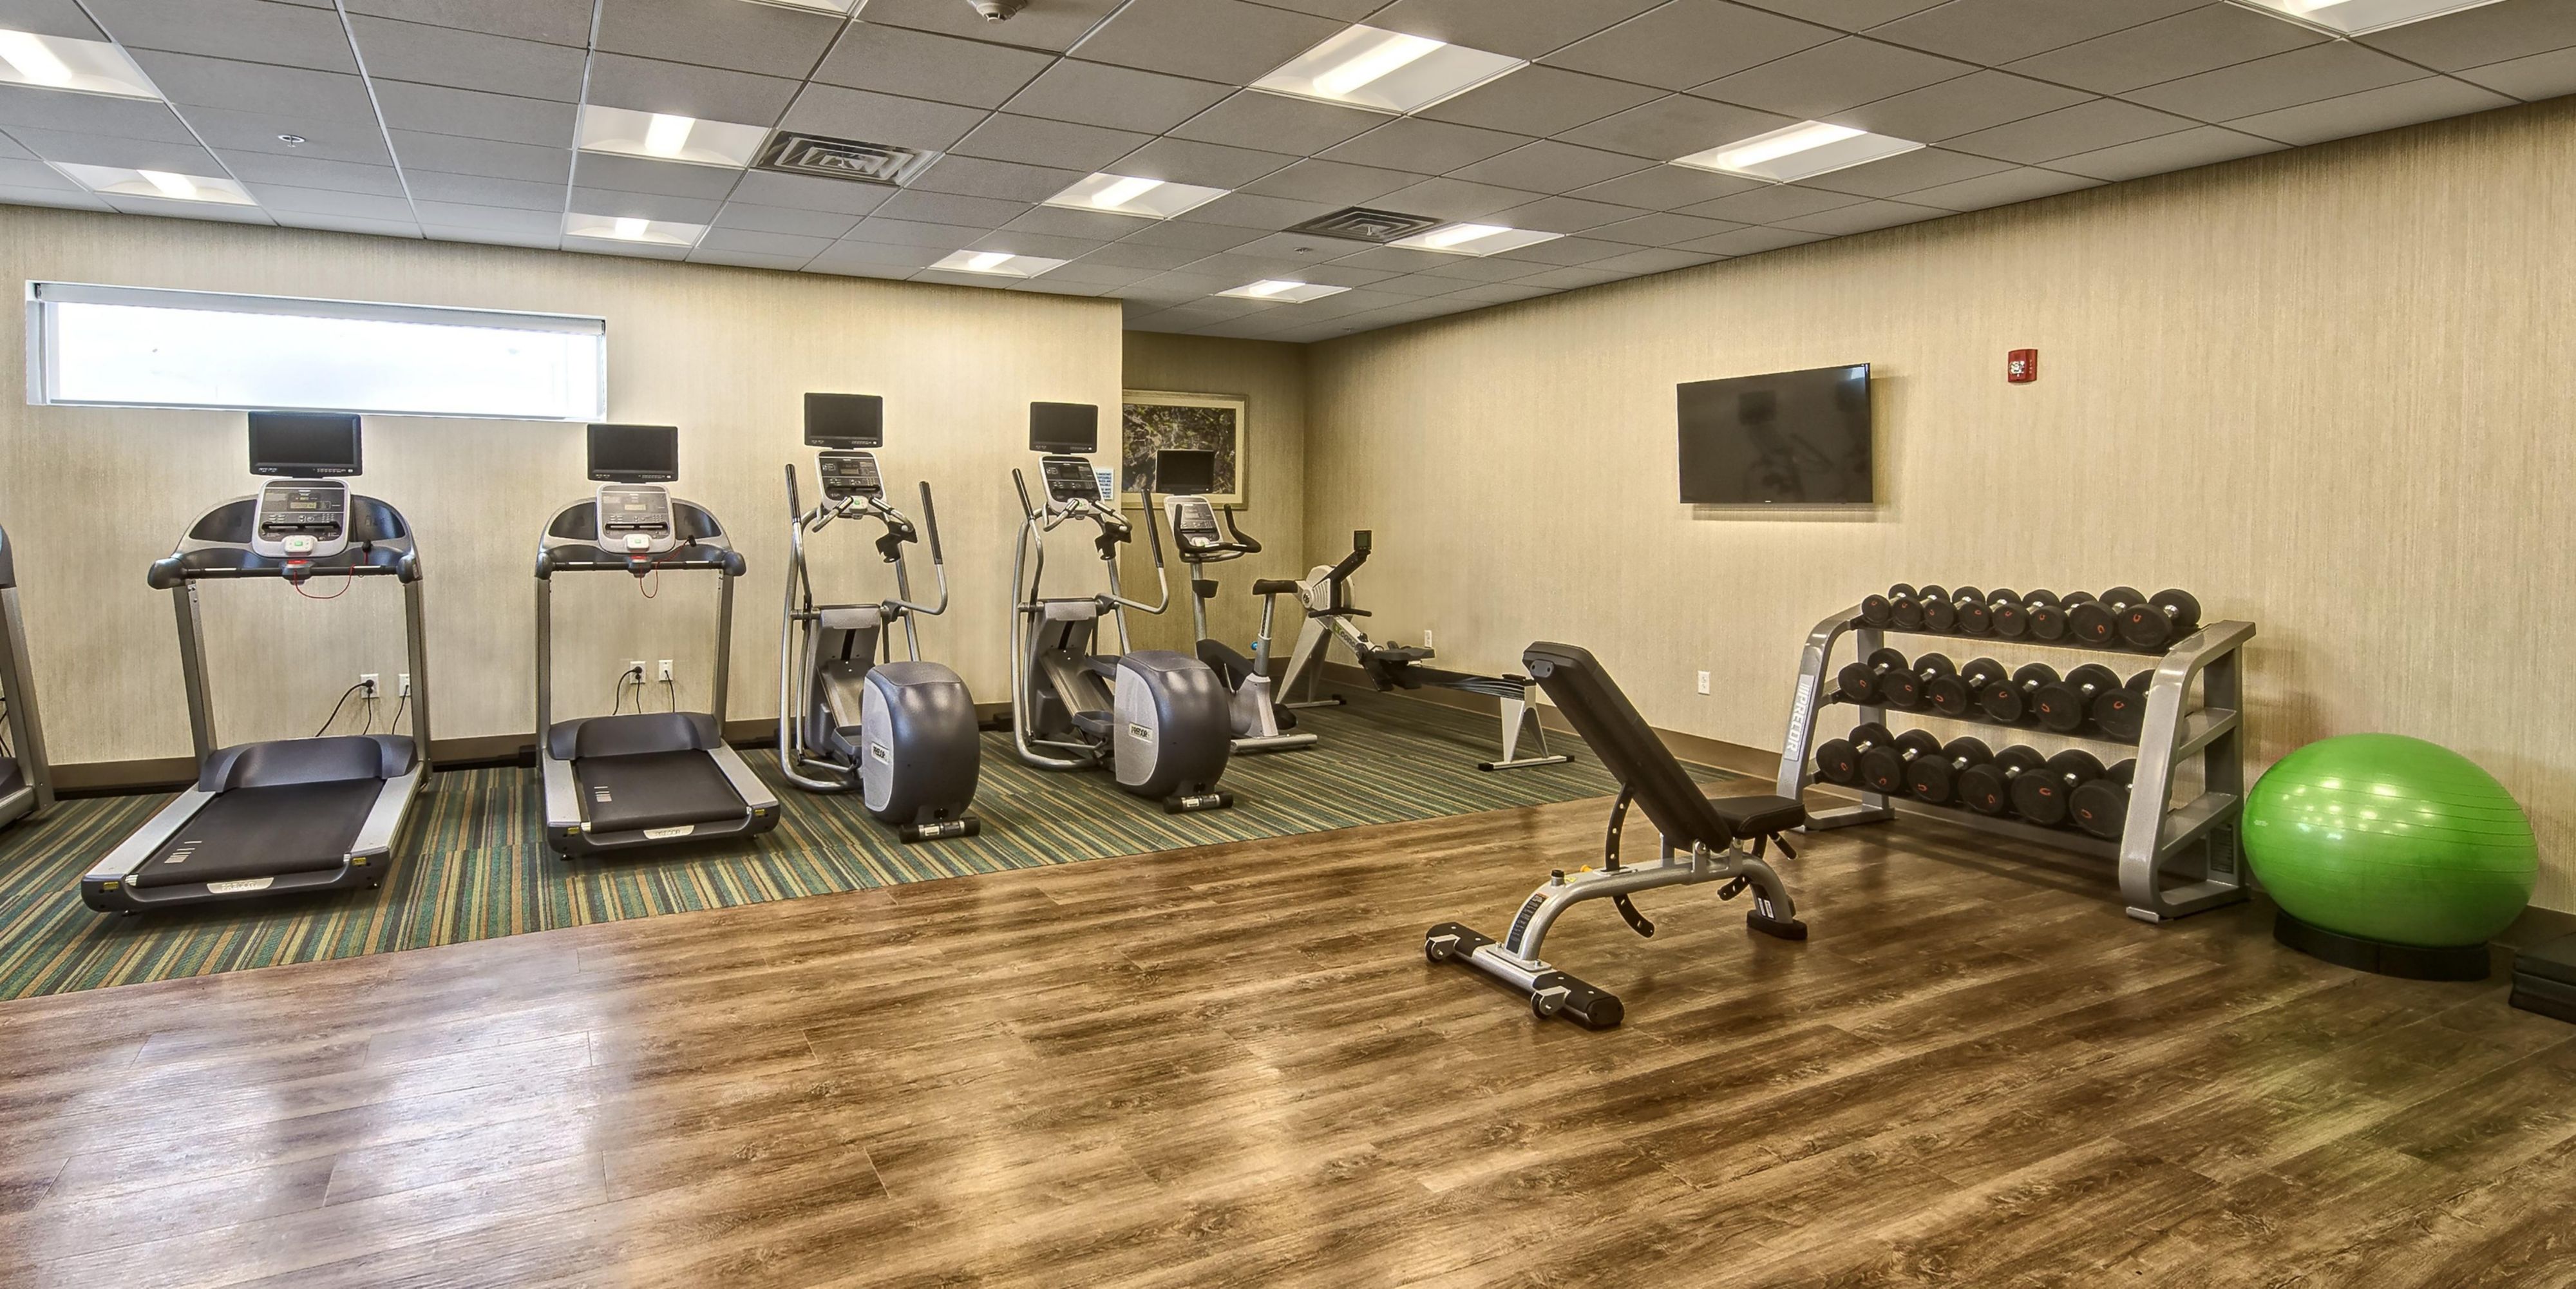 Our brand new Fitness Center is fully equipped with state of the art equipment, including treadmills, elliptical machines, upright bike, rower, dumbbells and bench, exercise ball, physicians scale, complimentary fresh towels, and water are also available. Open 24 hours a day, every day. 